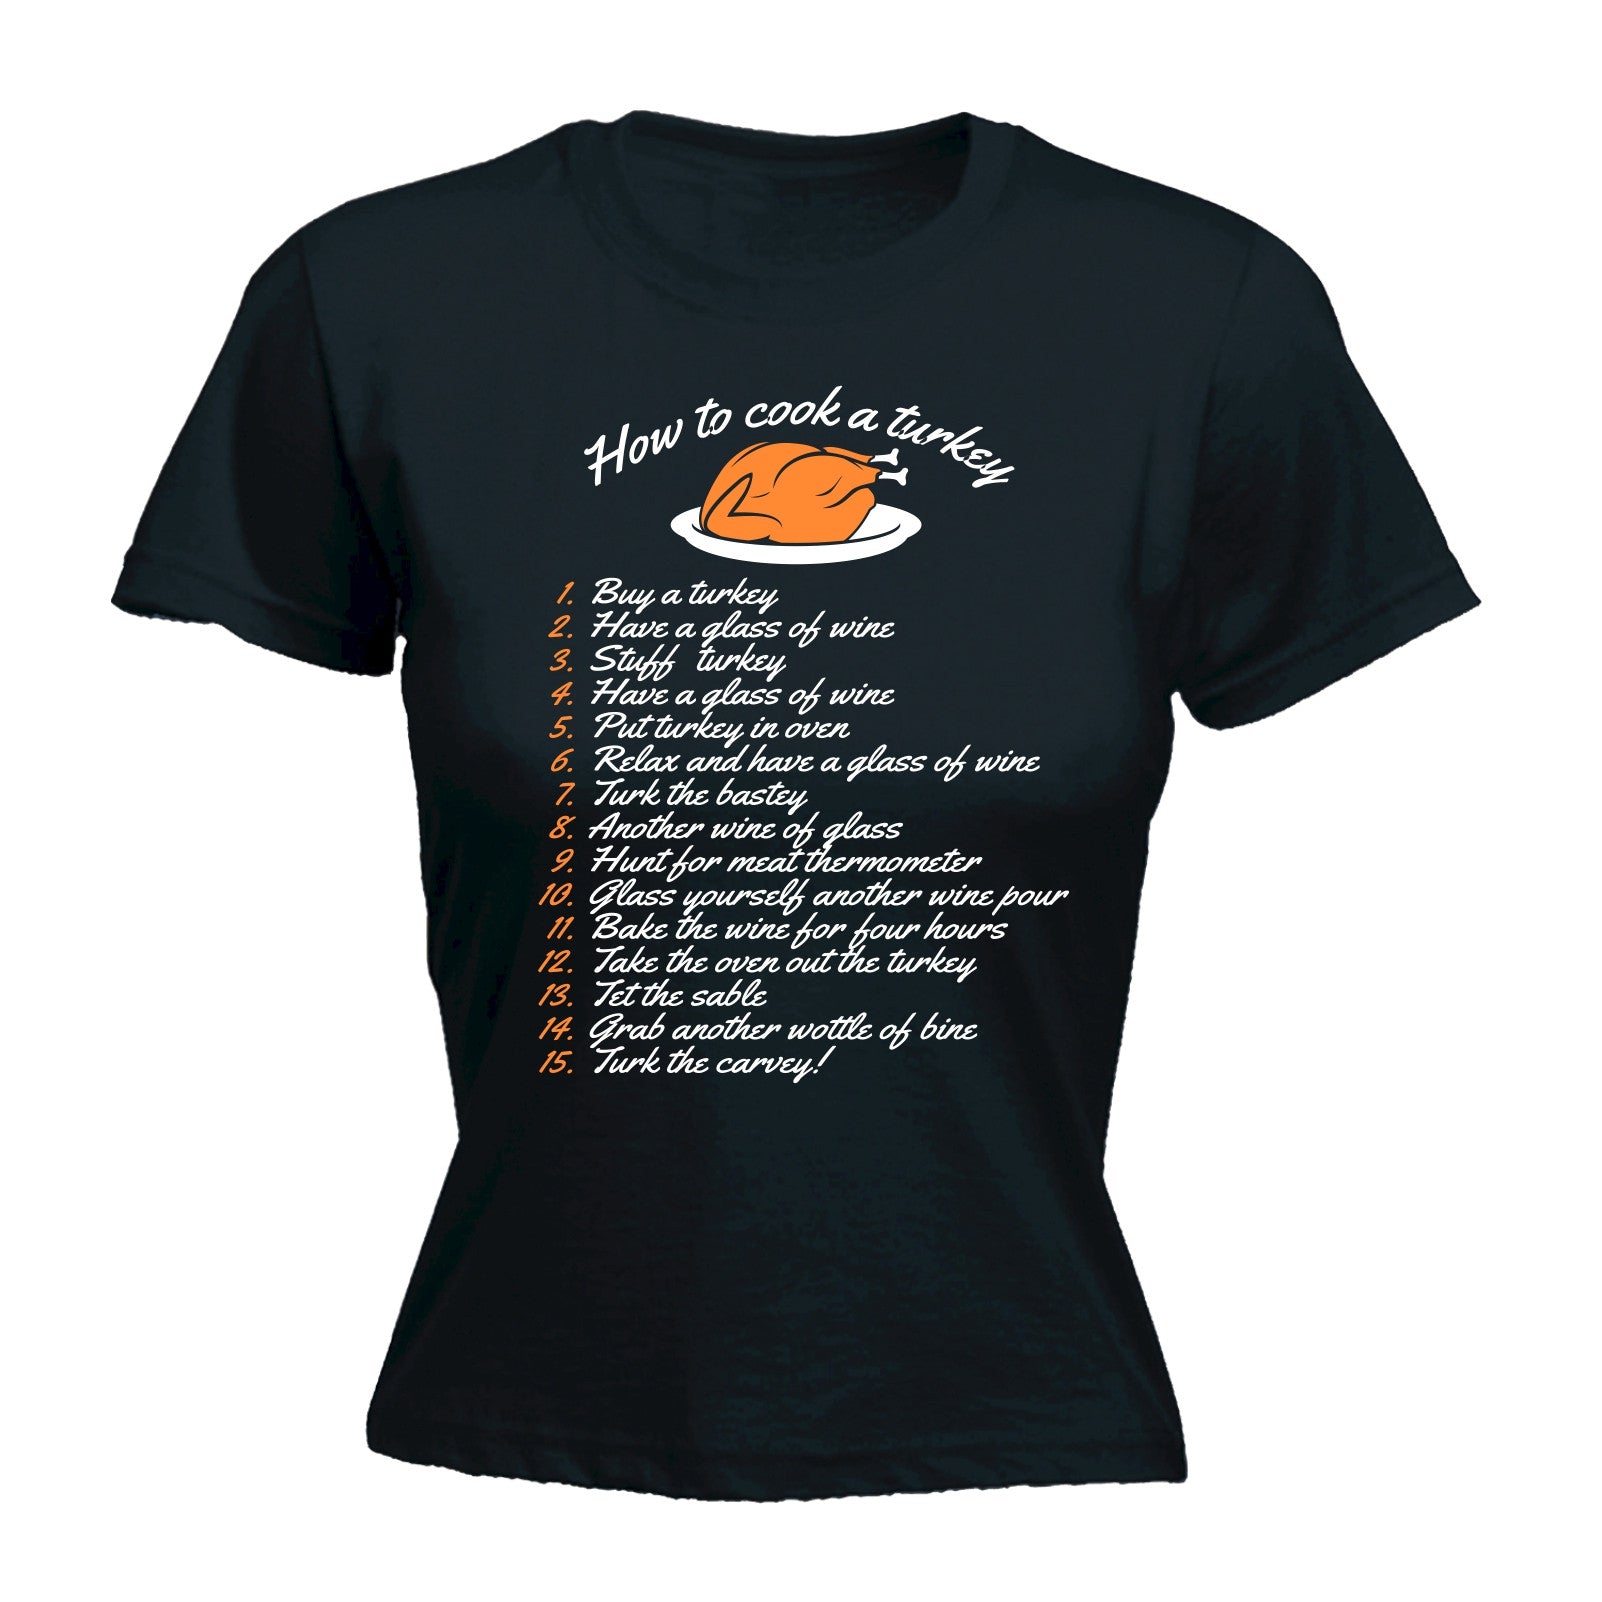 how-to-cook-a-turkey-womens-t-shirt-thanksgiving-chef-funny-present-xmas-gift-ebay